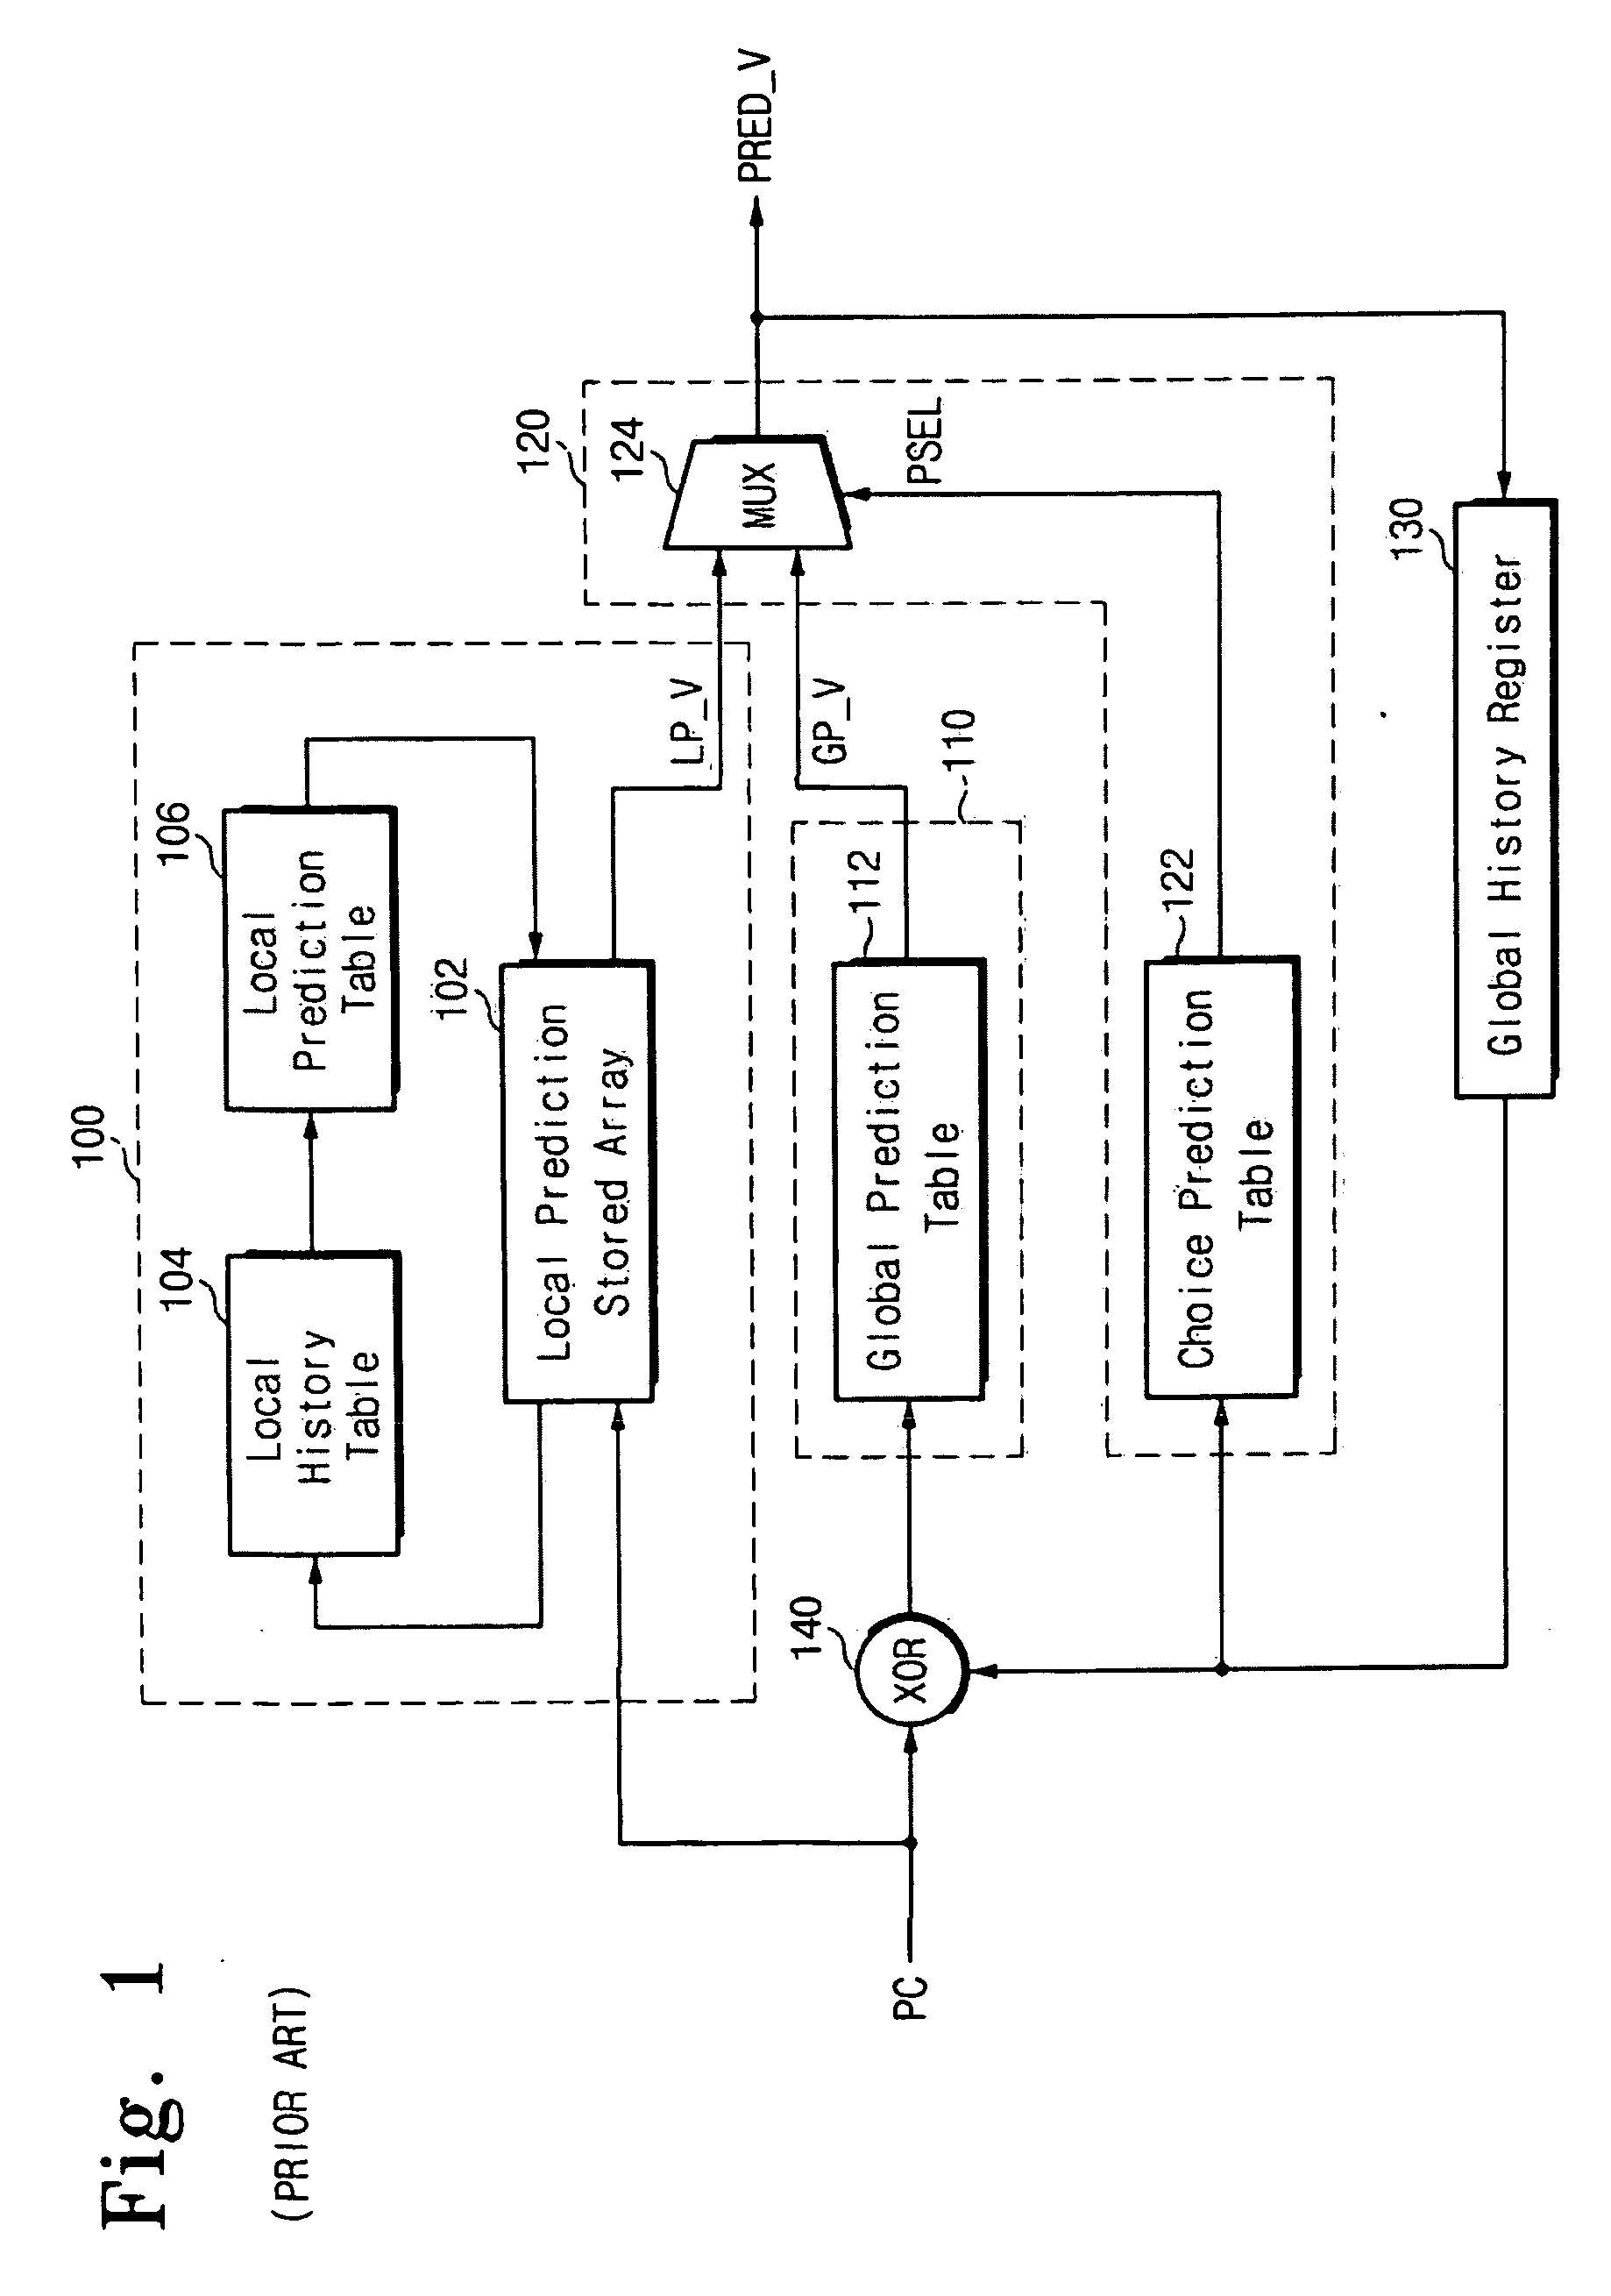 Branch prediction apparatus and method for low power consumption